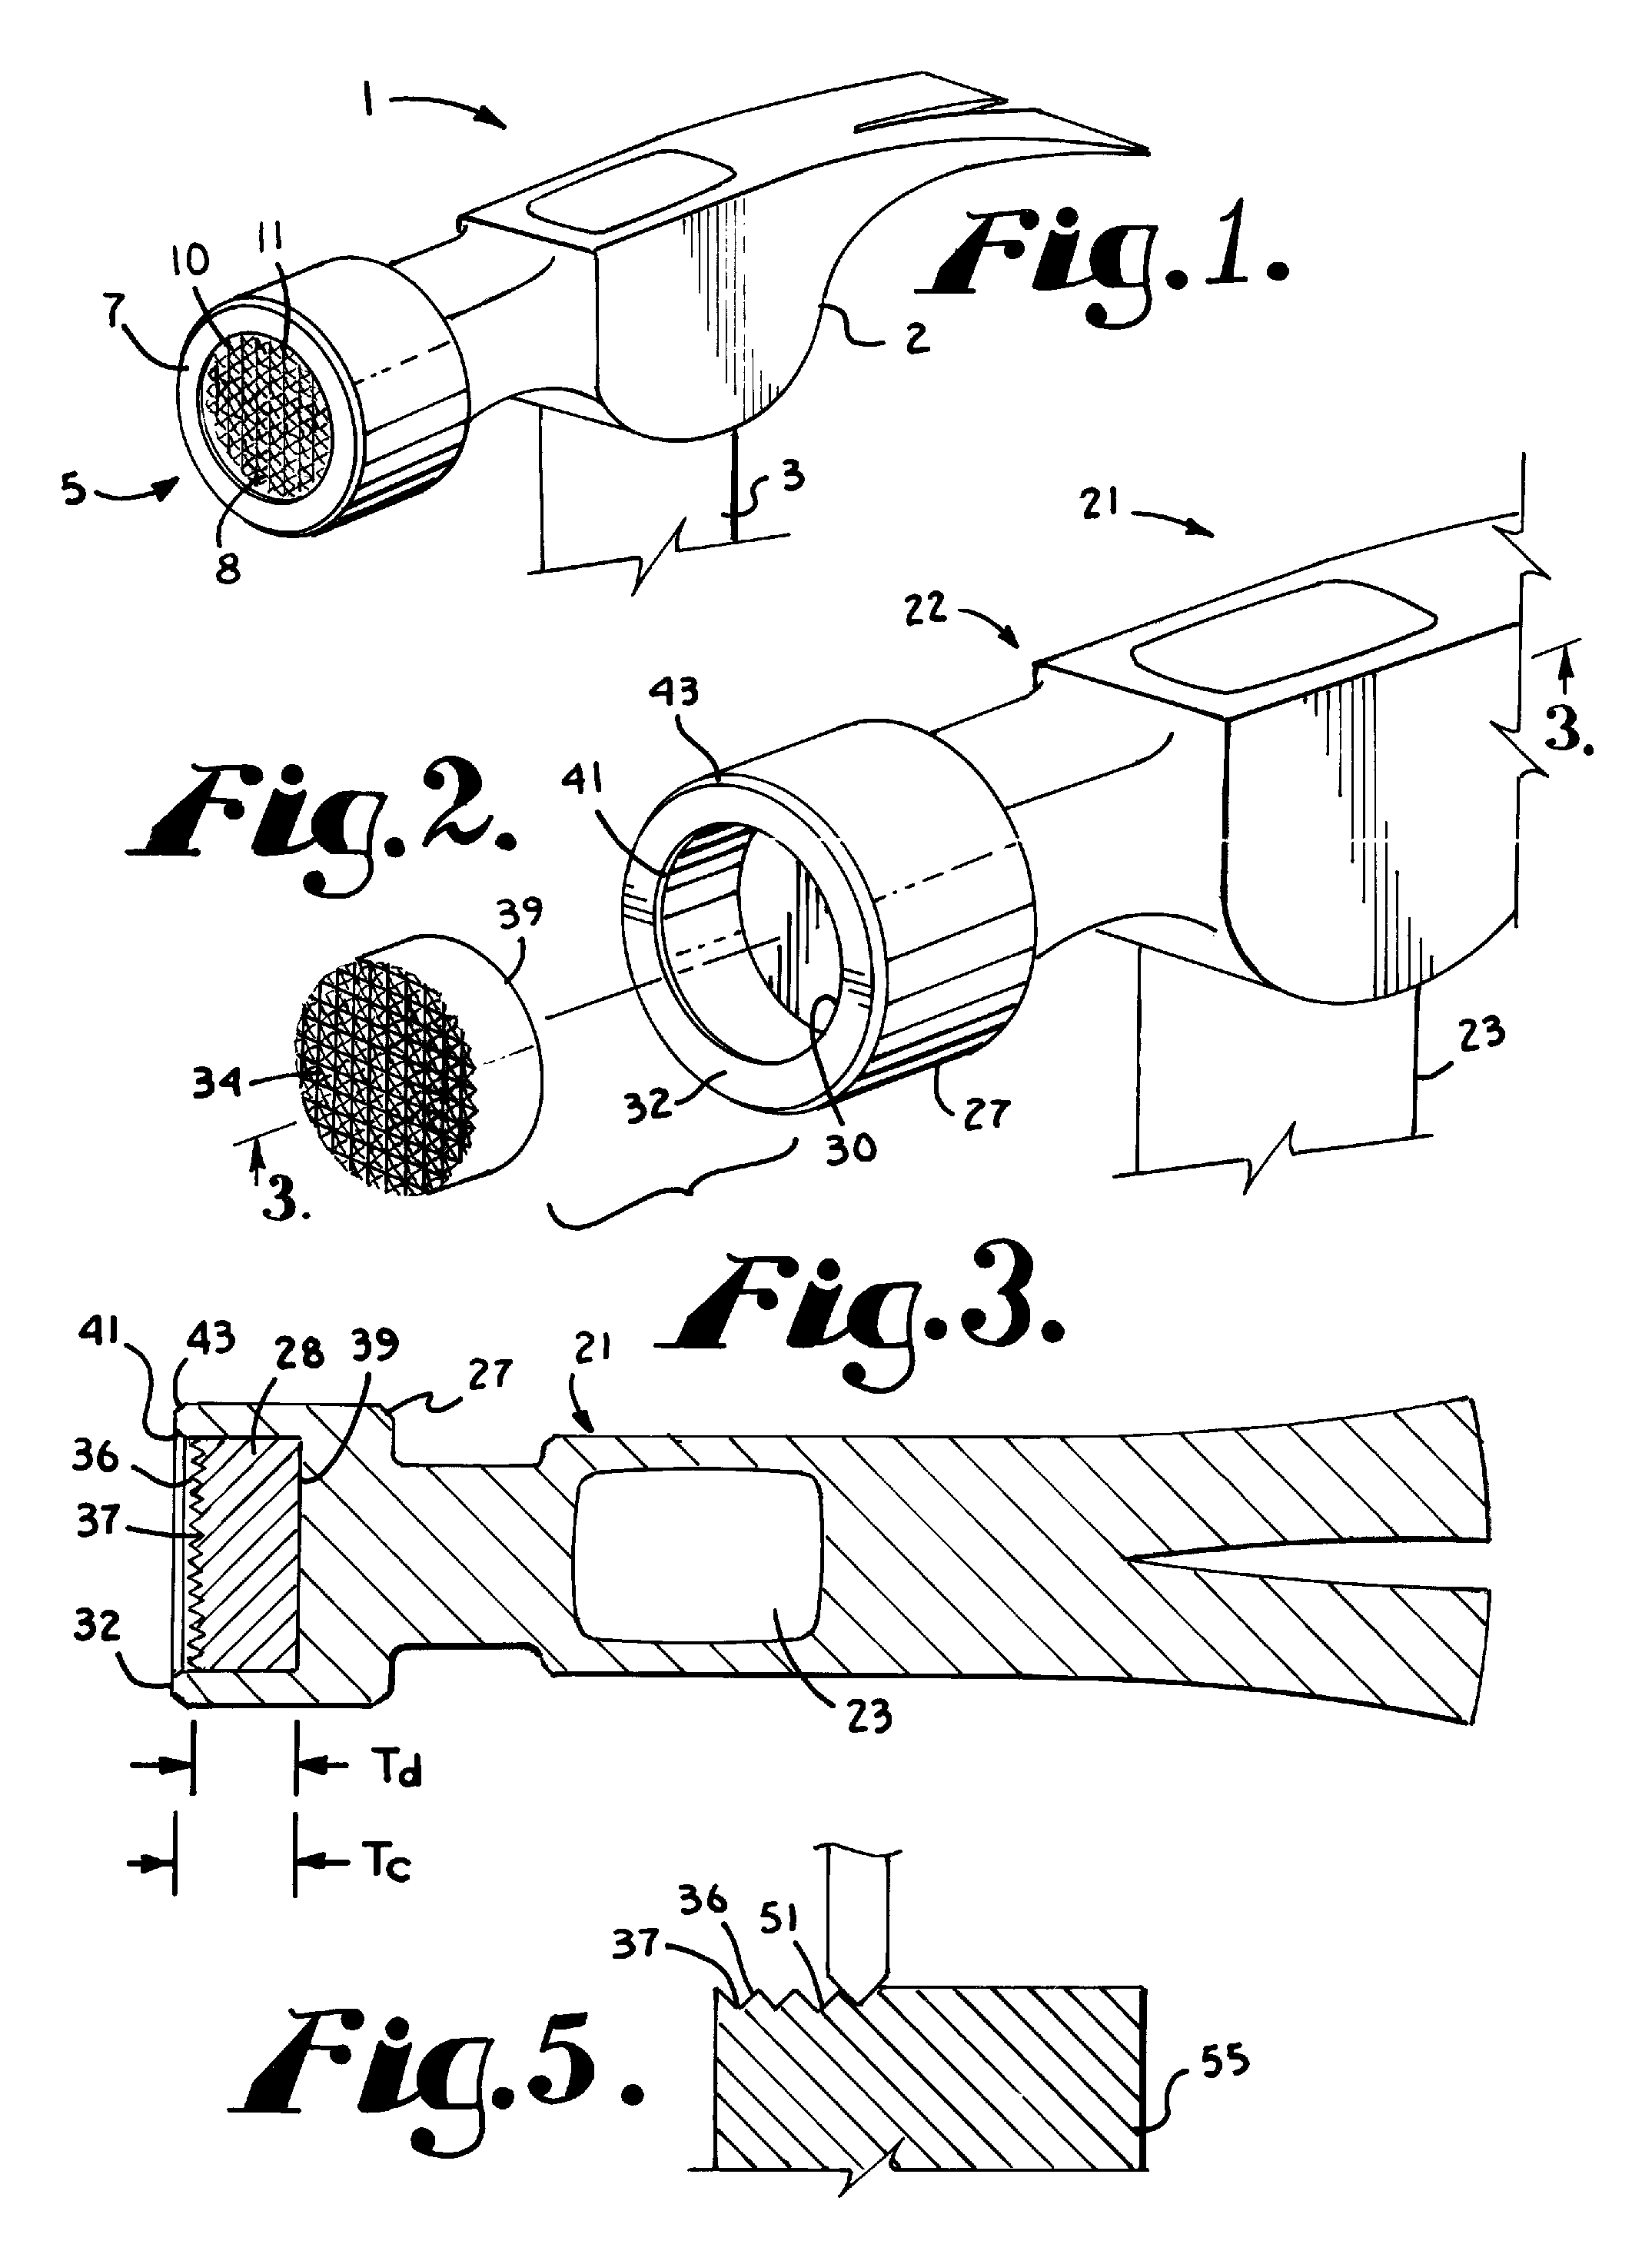 Hammer head with recessed traction striking surface